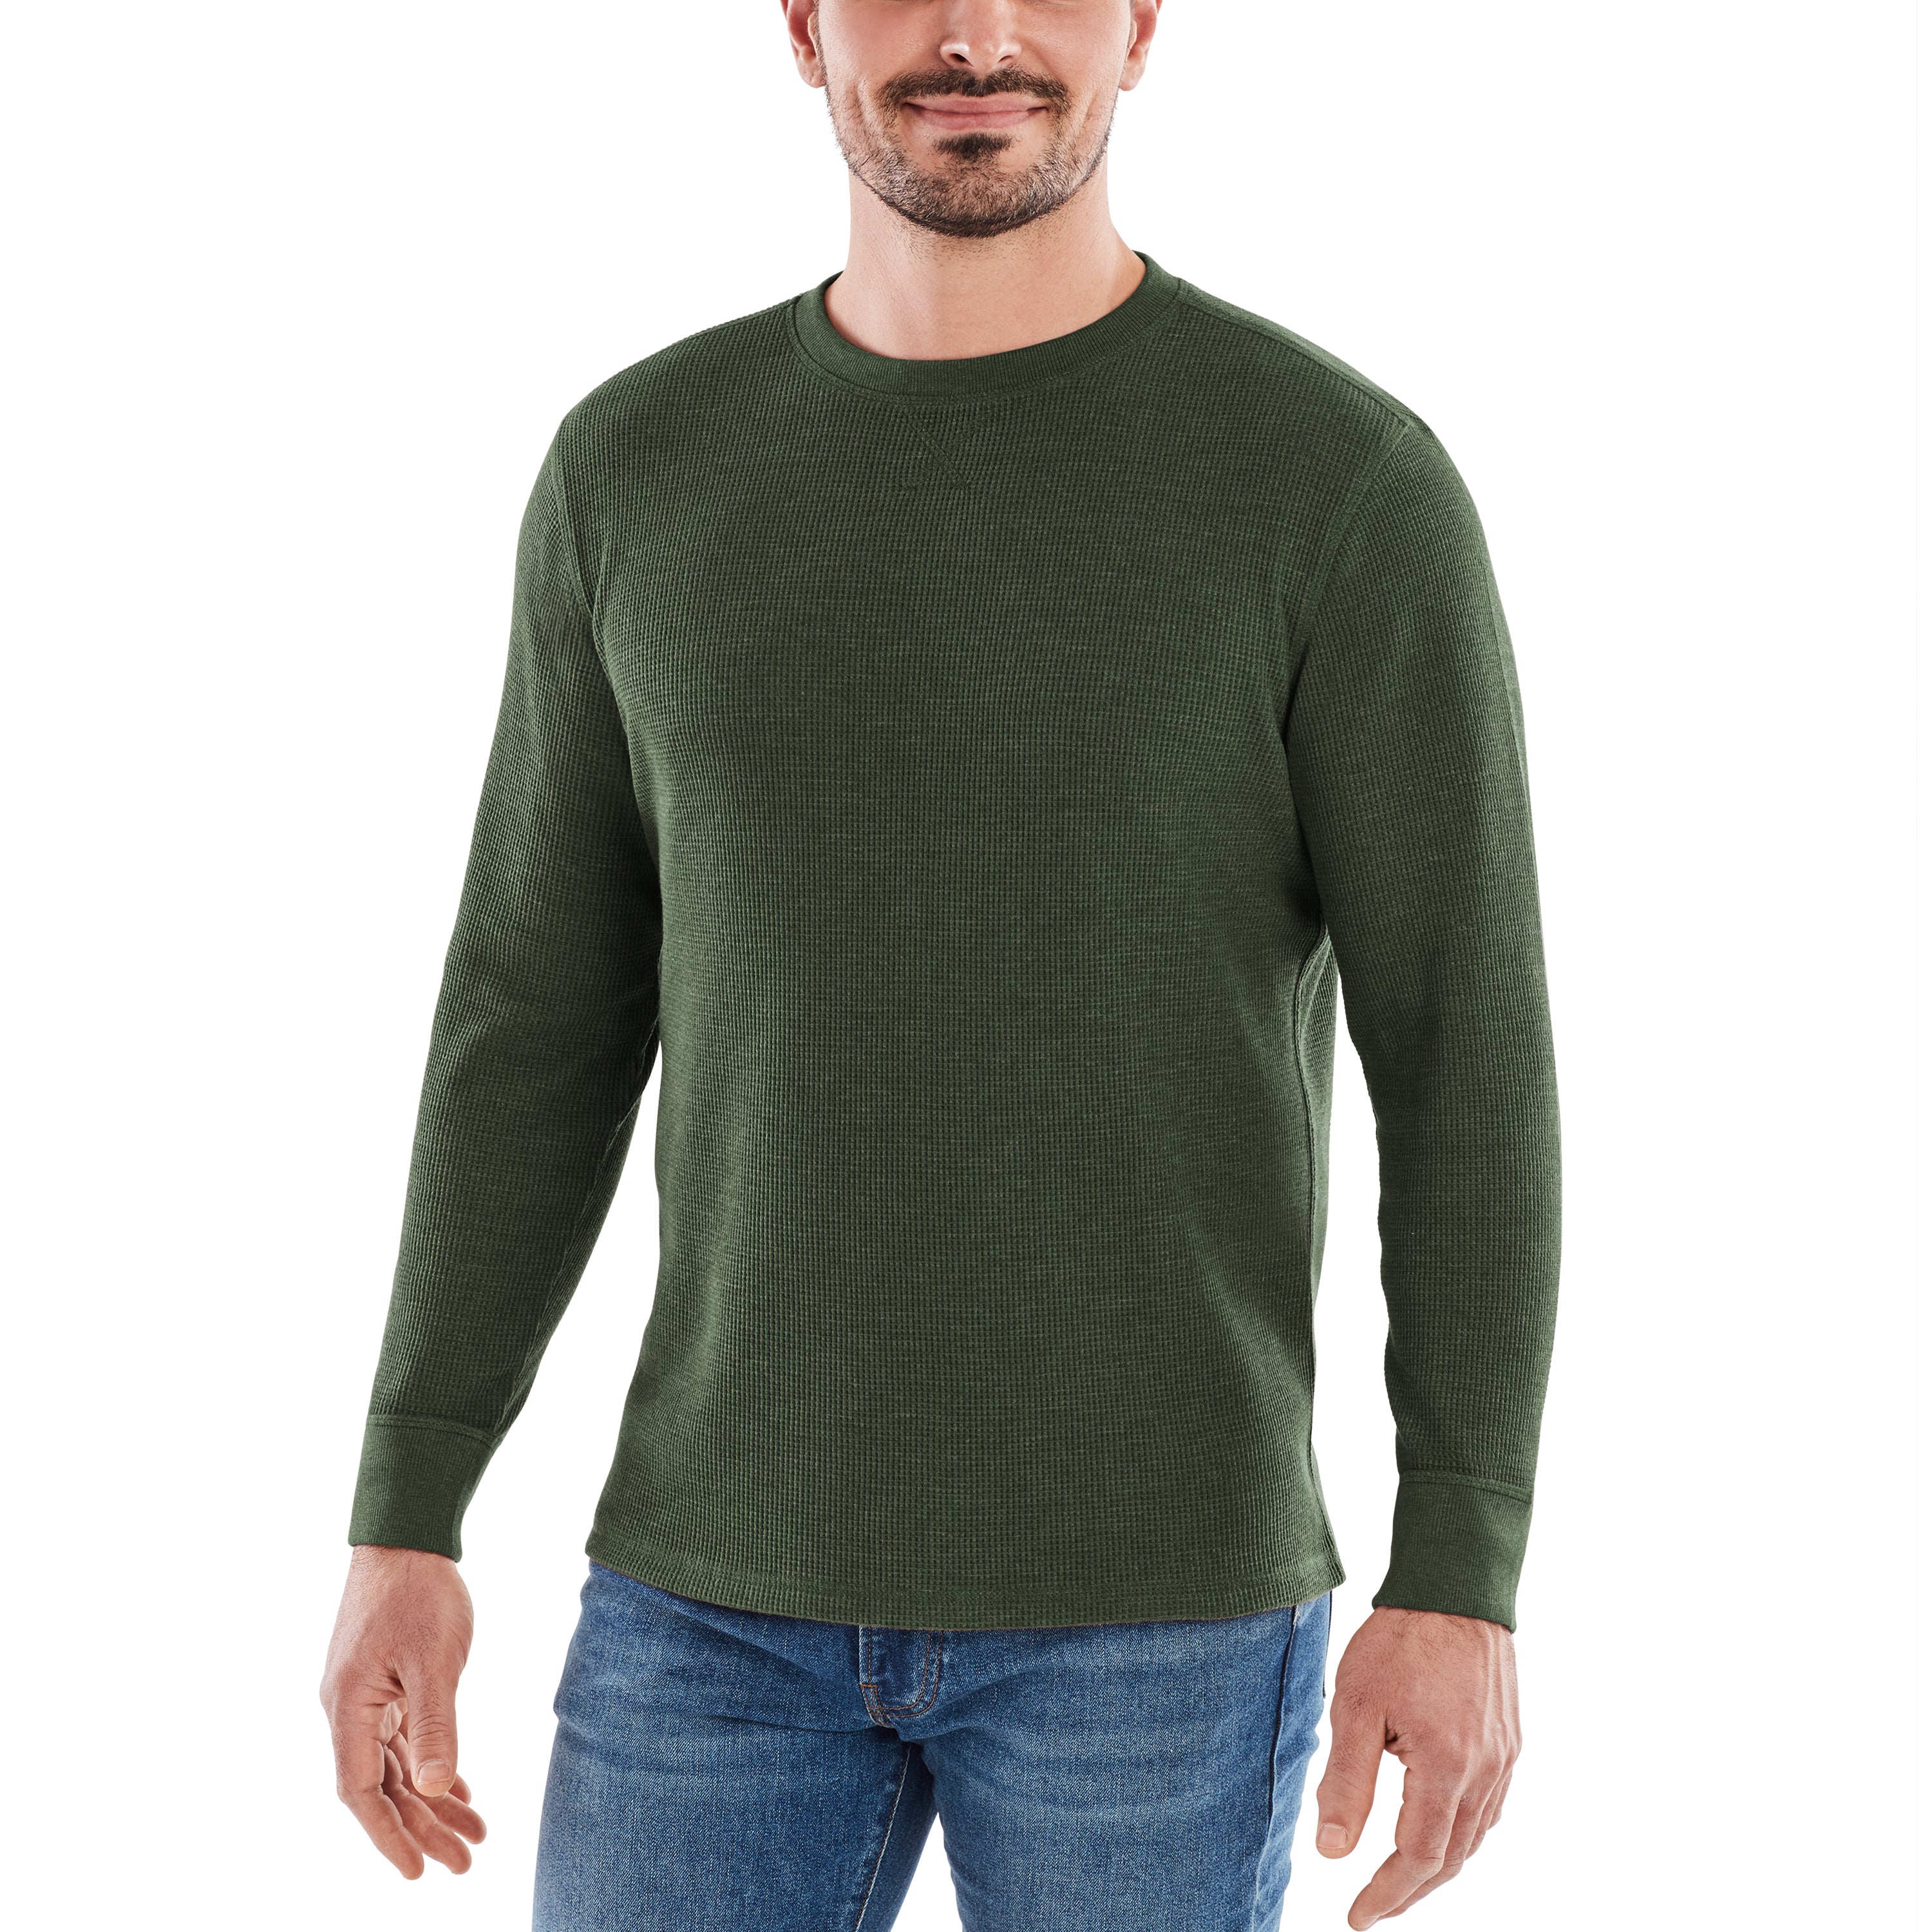 Men's Waffle Knit Thermal Crewneck Shirt Forever Spruce Heather / XL - The American Outdoorsman